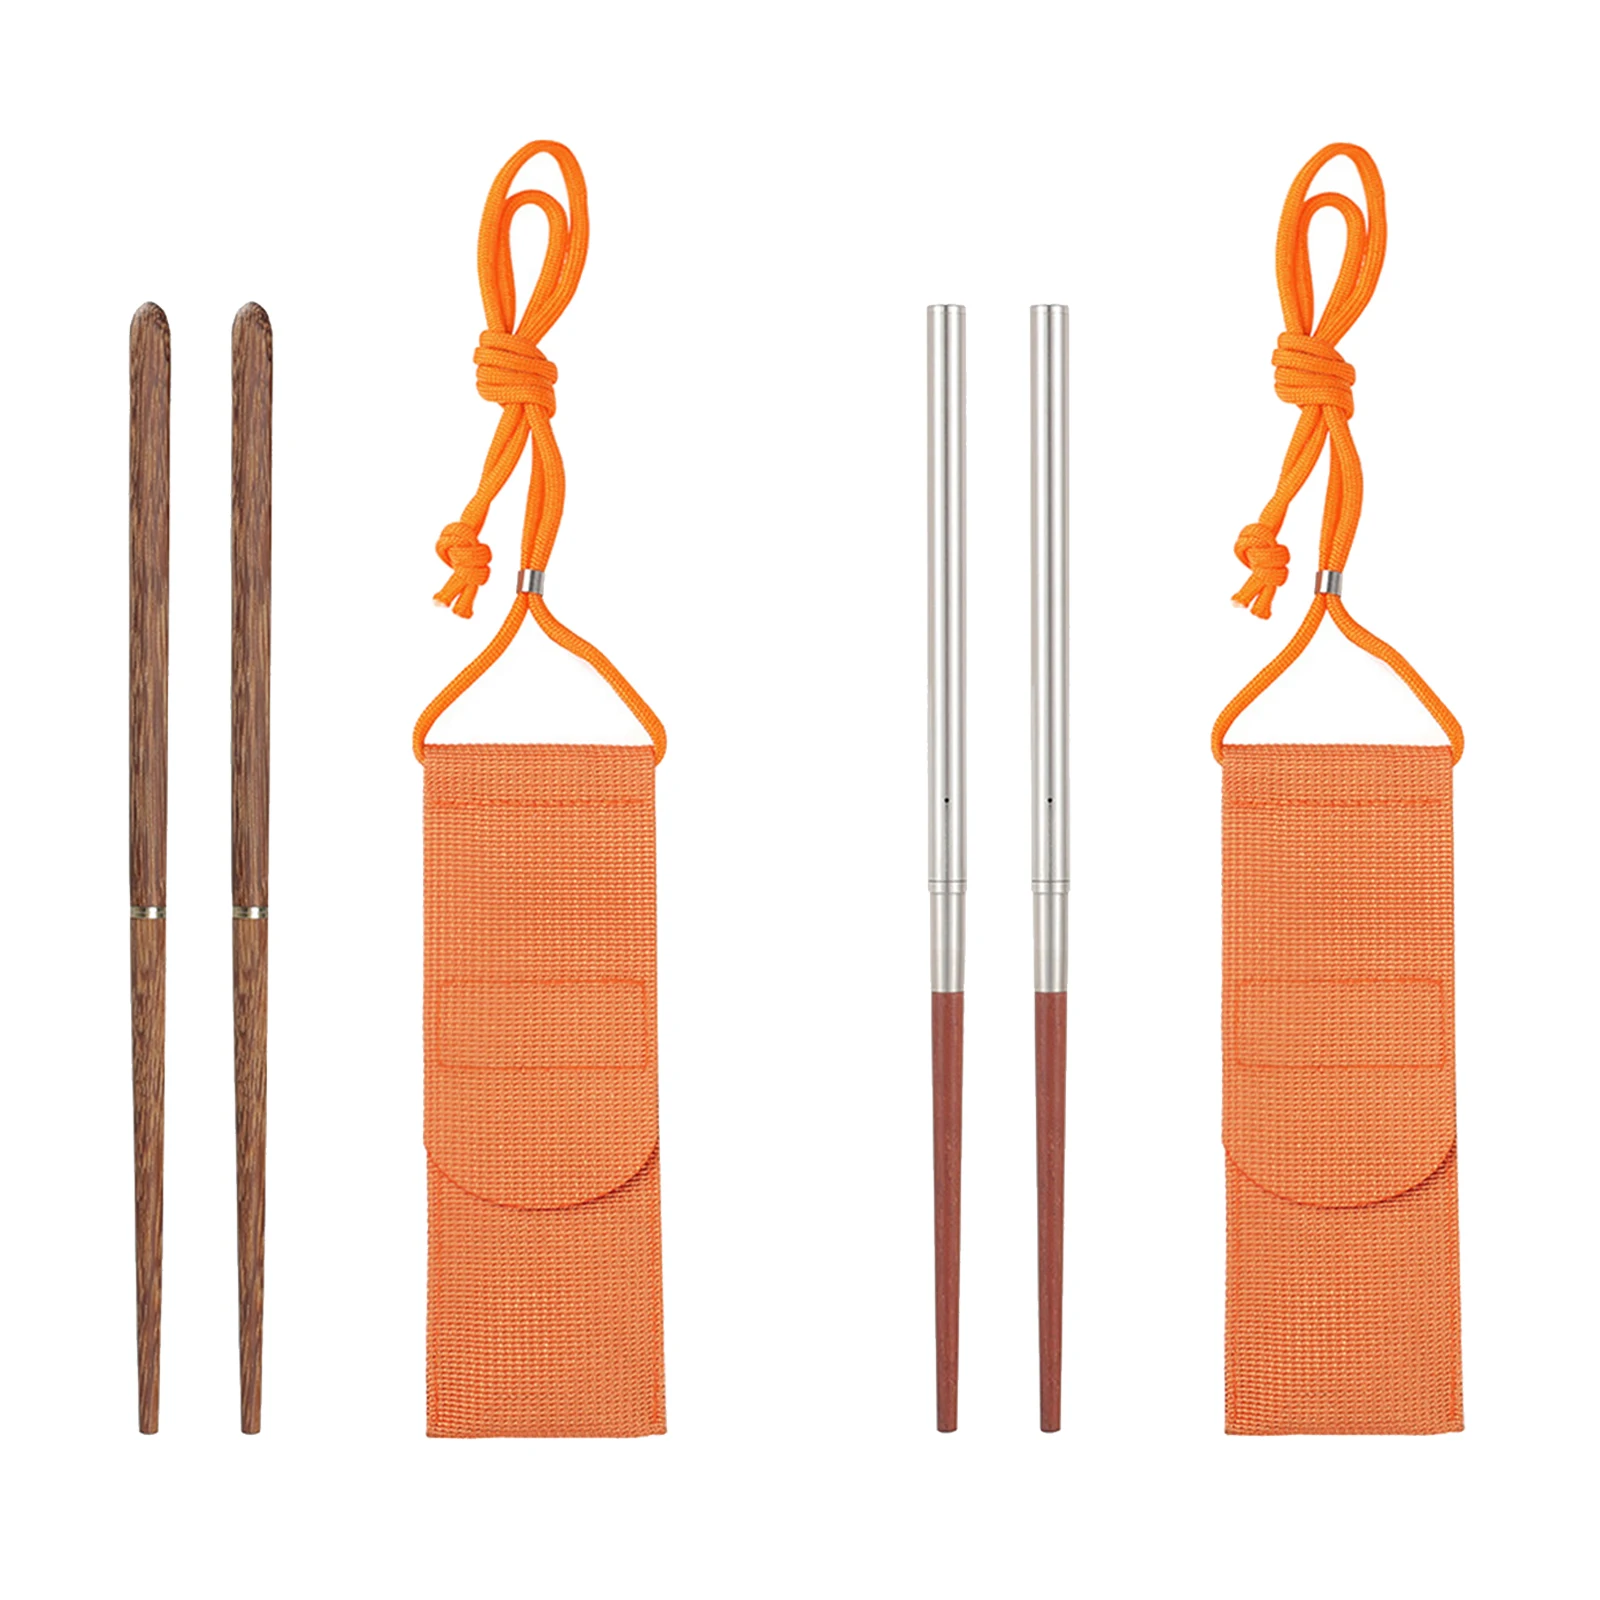 Lightweight Foldable Round Wooden Stainless Steel Chopsticks with Carrying Pouch for Camping Picnic Traveling